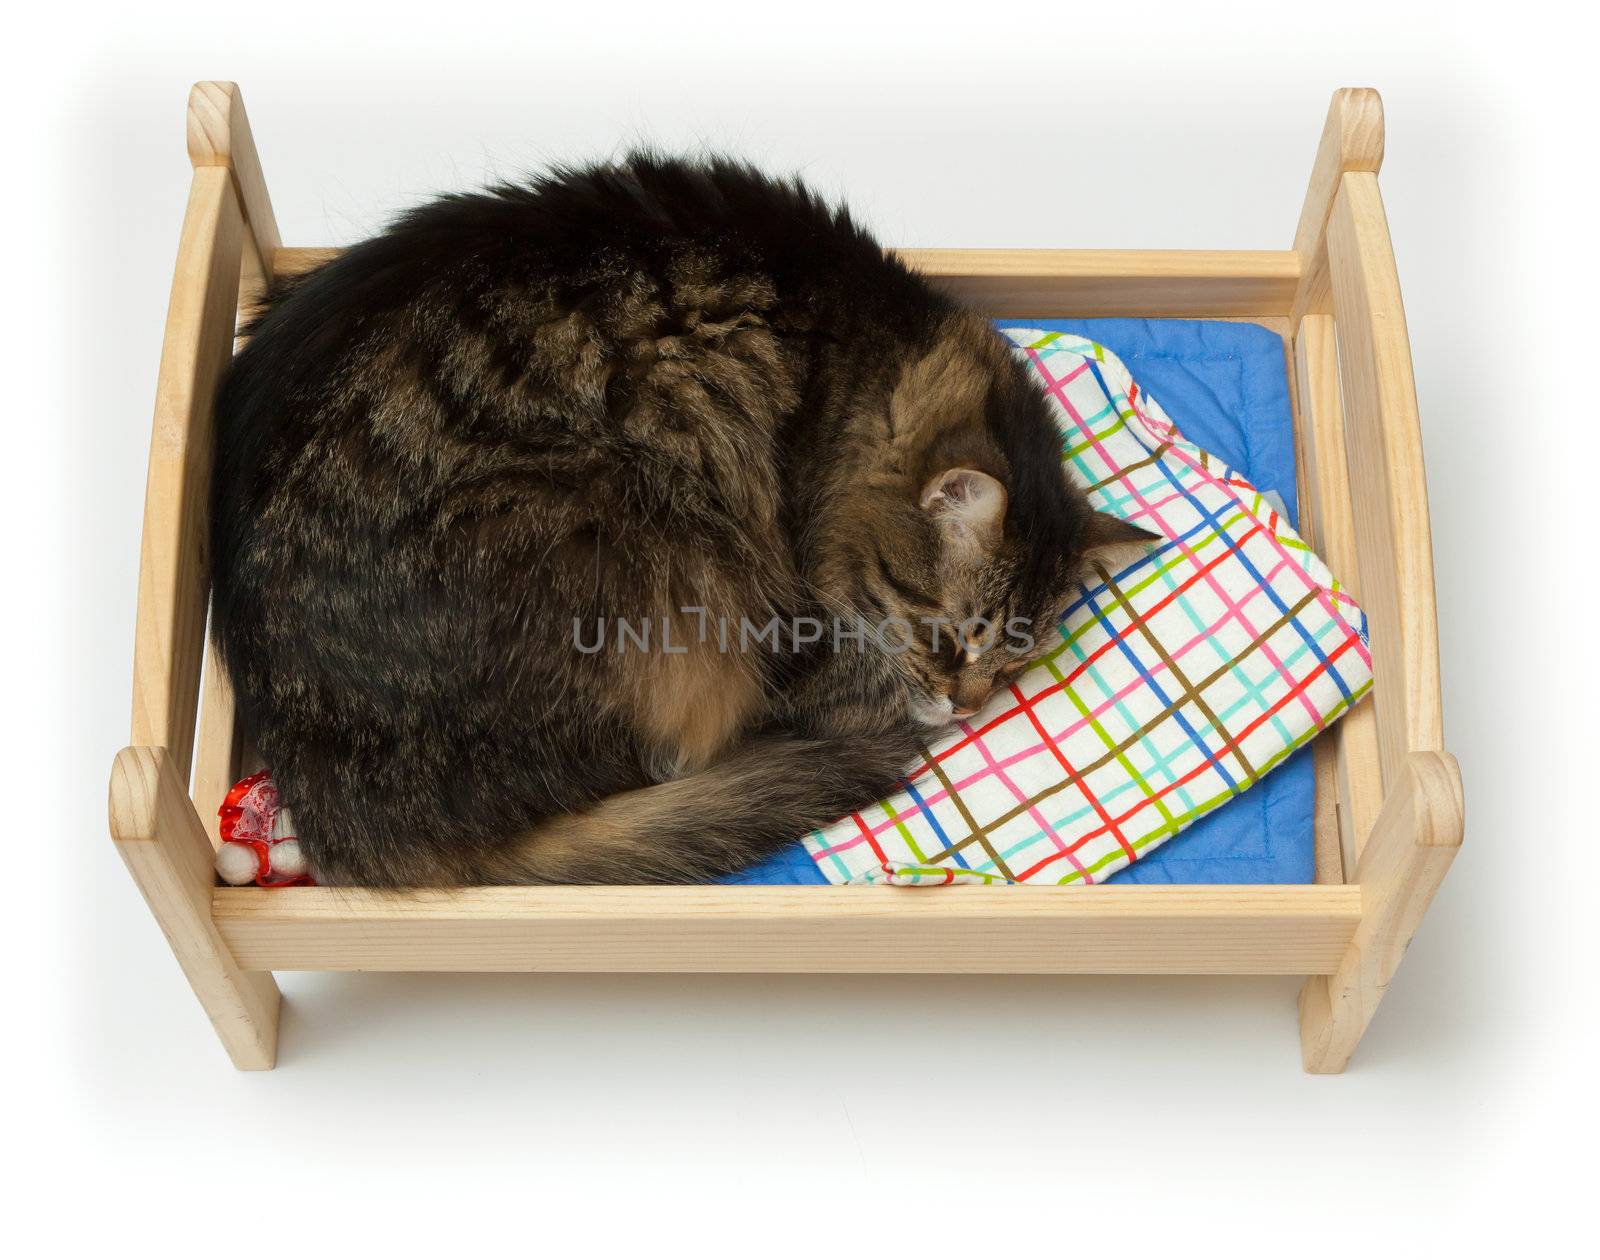 Cat, curled up asleep in a children's toy crib